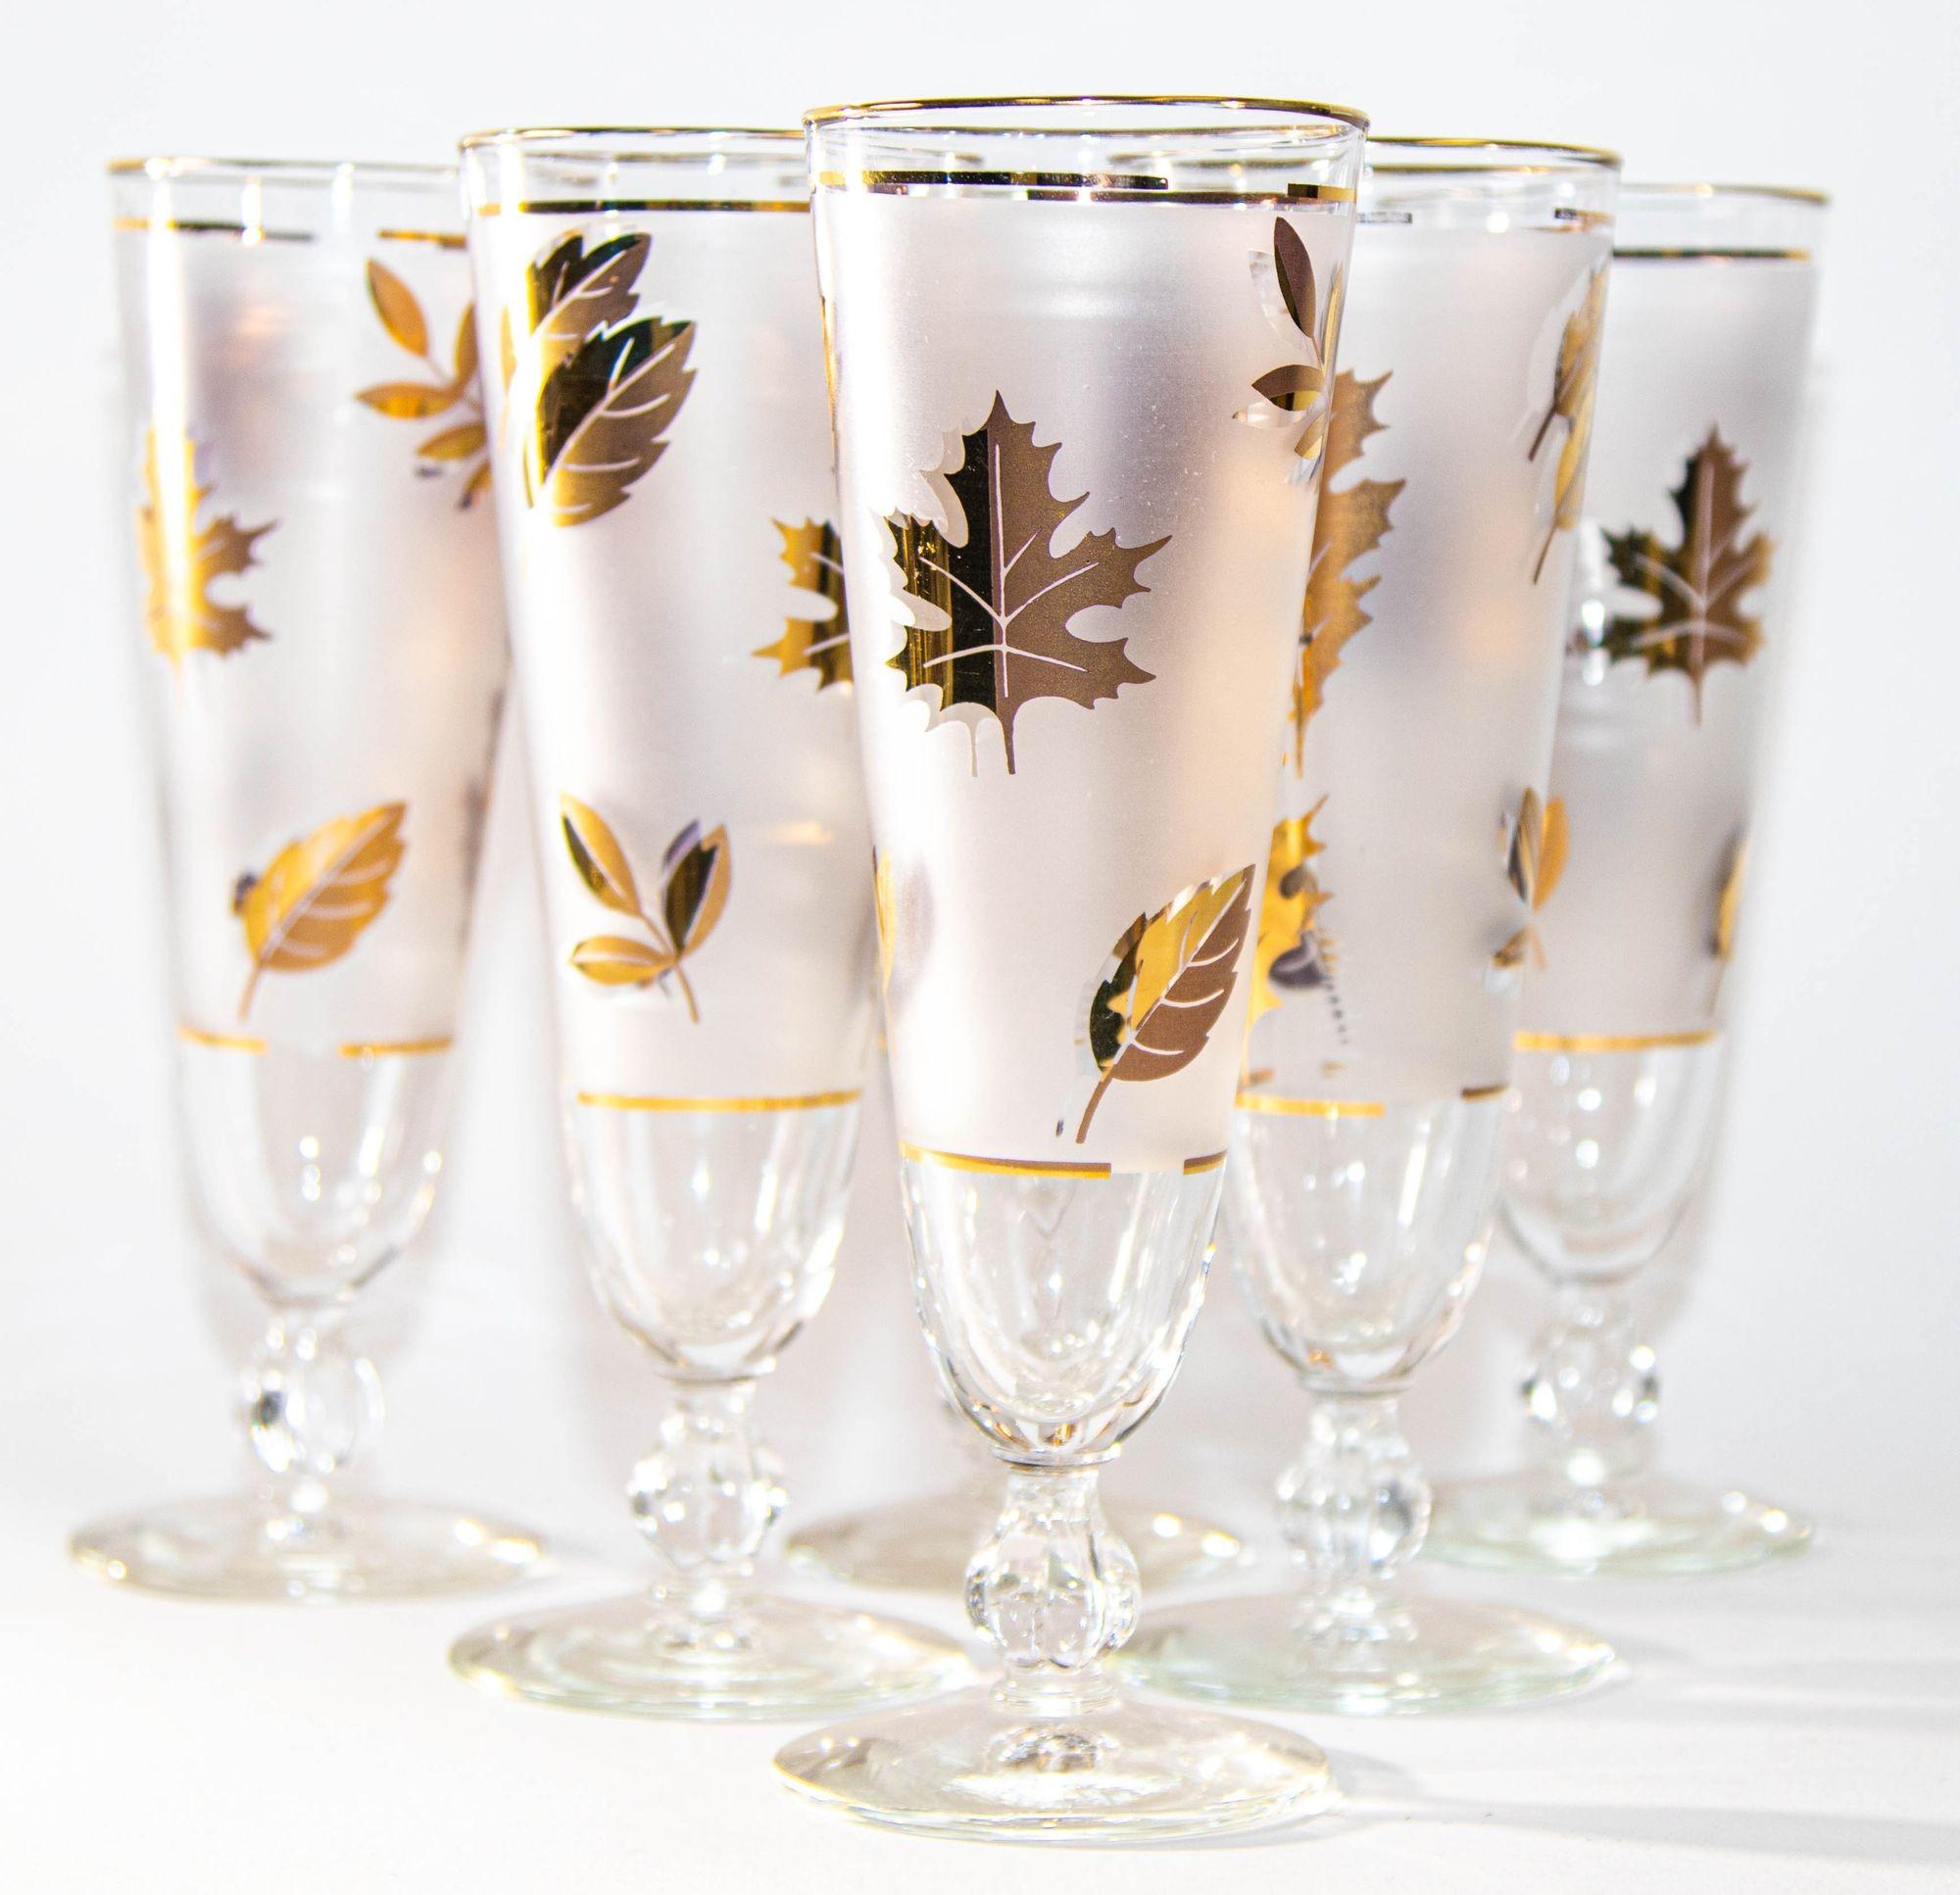 Libbey Glass Company Golden Foliage Pilsner Glass set of 6 Frosted with Gold Leaf.
Set of vintage pilsner glasses from Libbey in their Golden Foliage pattern.
Libbey Golden Foliage collection Made in America.
They are stemmed drinking glasses with